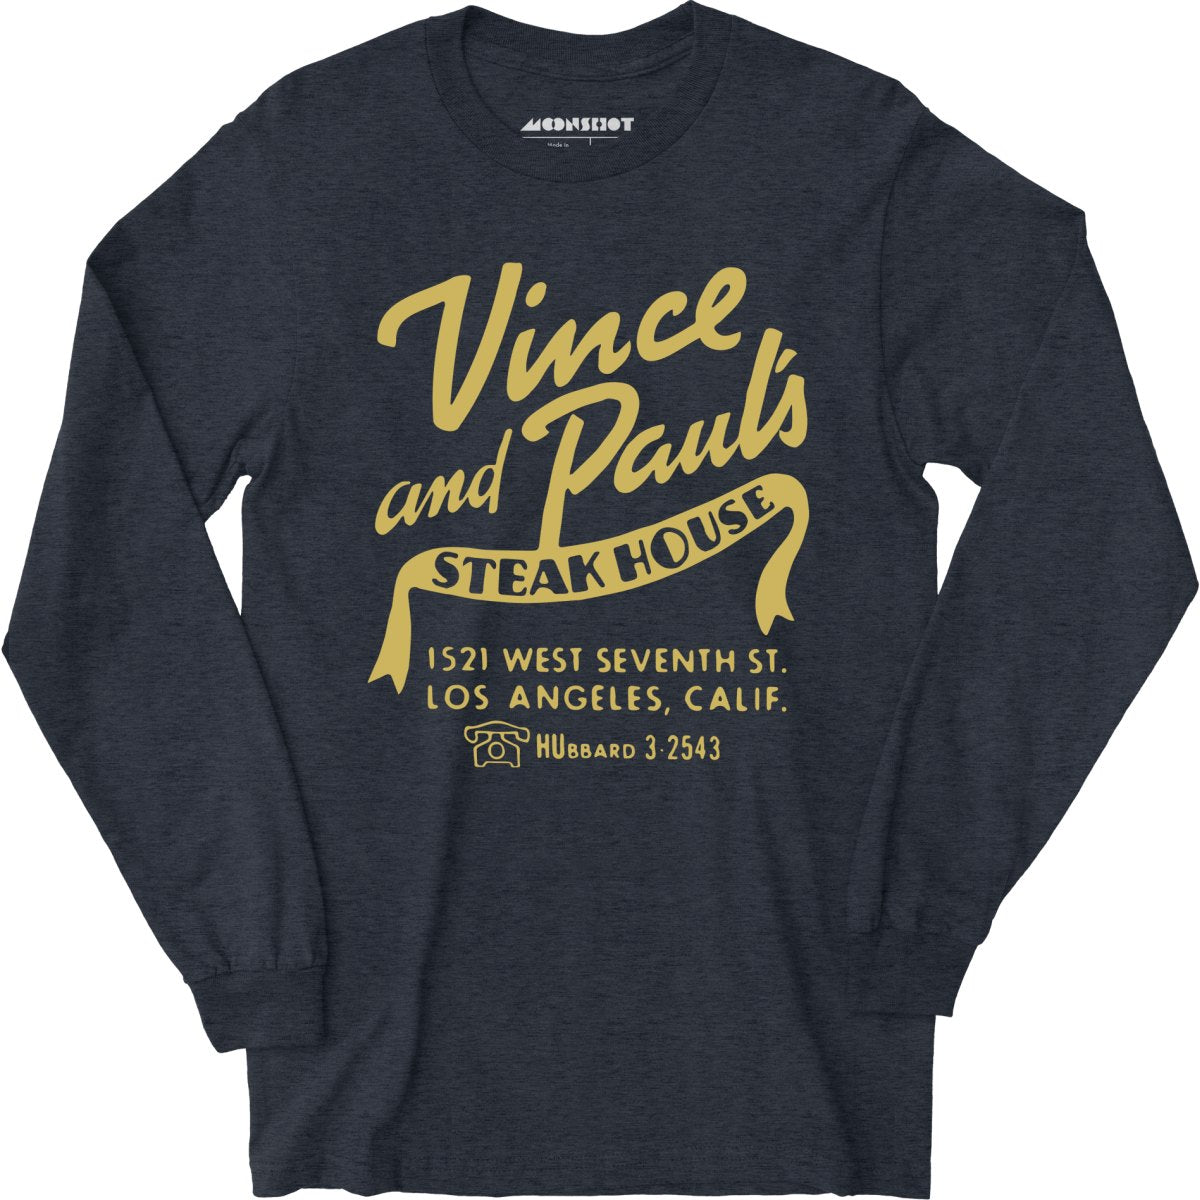 Vince and Paul's Steakhouse - Los Angeles, CA - Vintage Restaurant - Long Sleeve T-Shirt